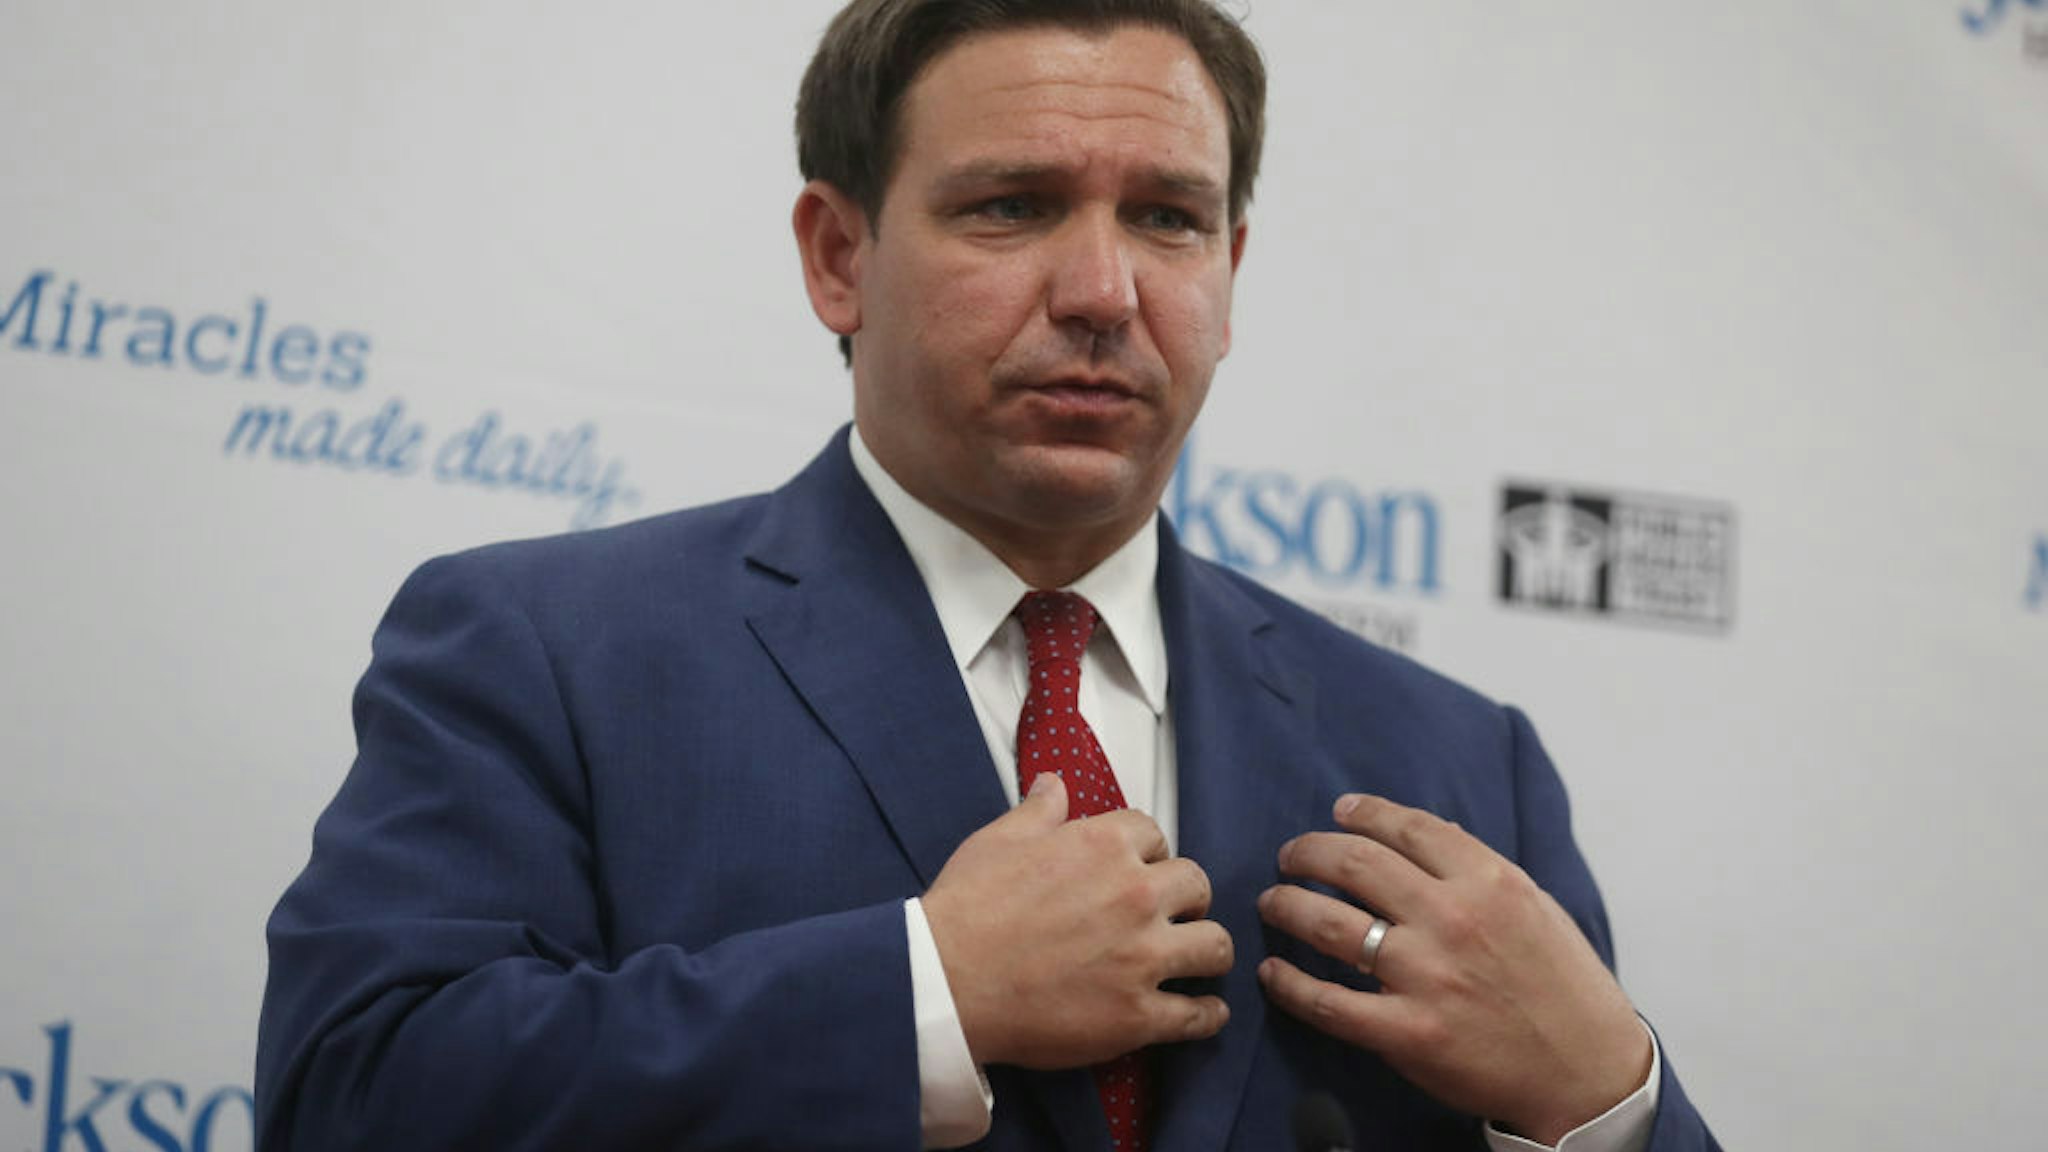 Florida Gov. Ron DeSantis speaks at a new conference on the surge in coronavirus cases in the state held at the Jackson Memorial Hospital on July 13, 2020 in Miami, ` of COVID-19 as the state of Florida tries to contain the recent spike.